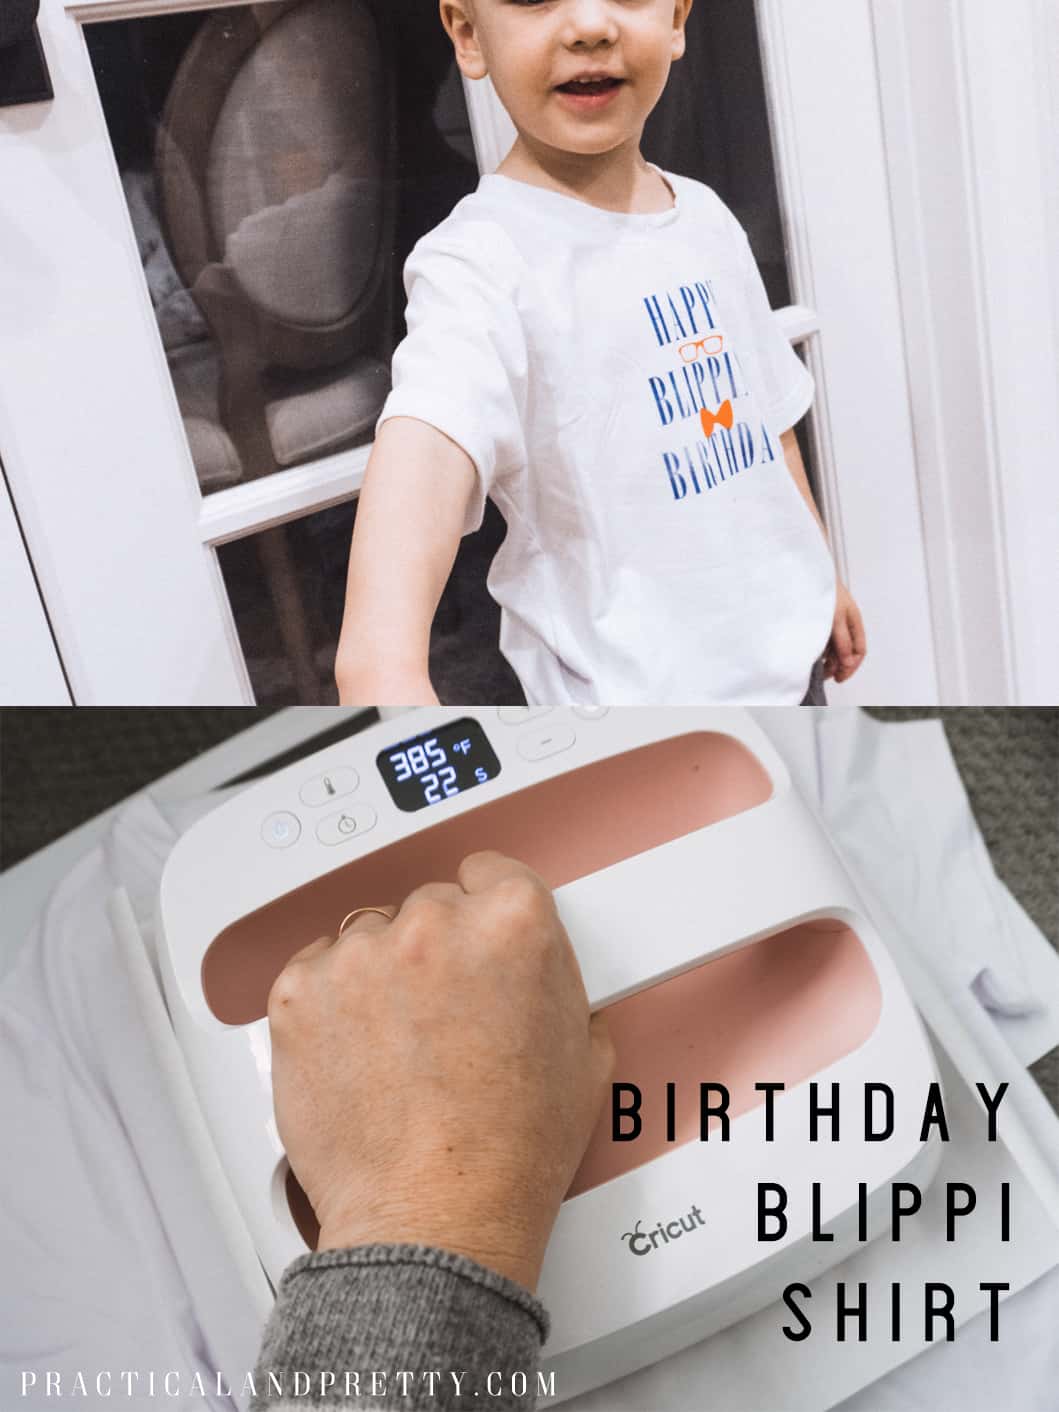 This silly Blippi shirt is perfect for the birthday child or you could even make a few for all the guests! They will get a kick out of what it says. 